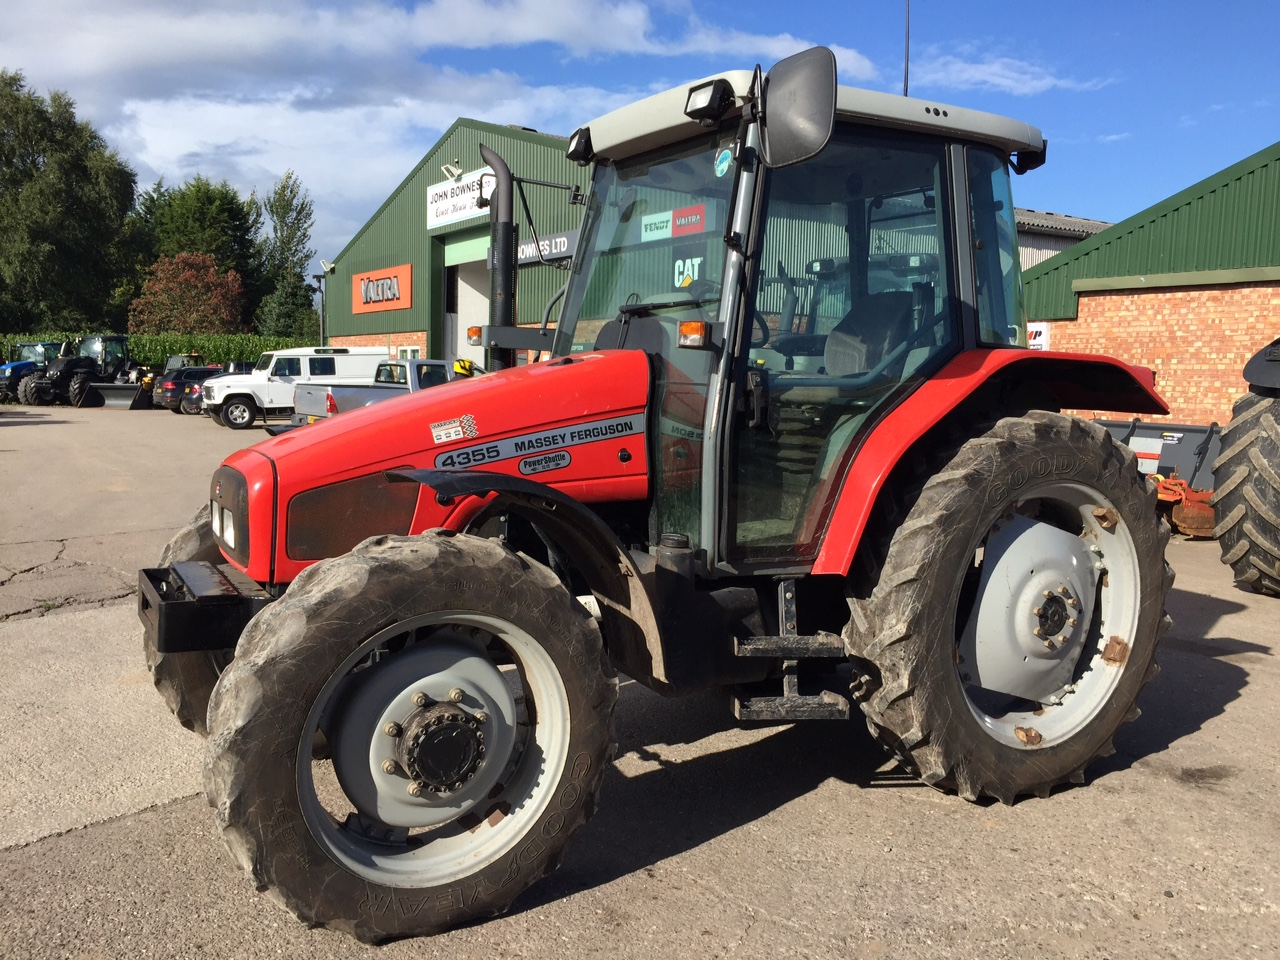 MASSEY FERGUSON 4355 - John Bownes | New and used Tractors, New Valtra ...